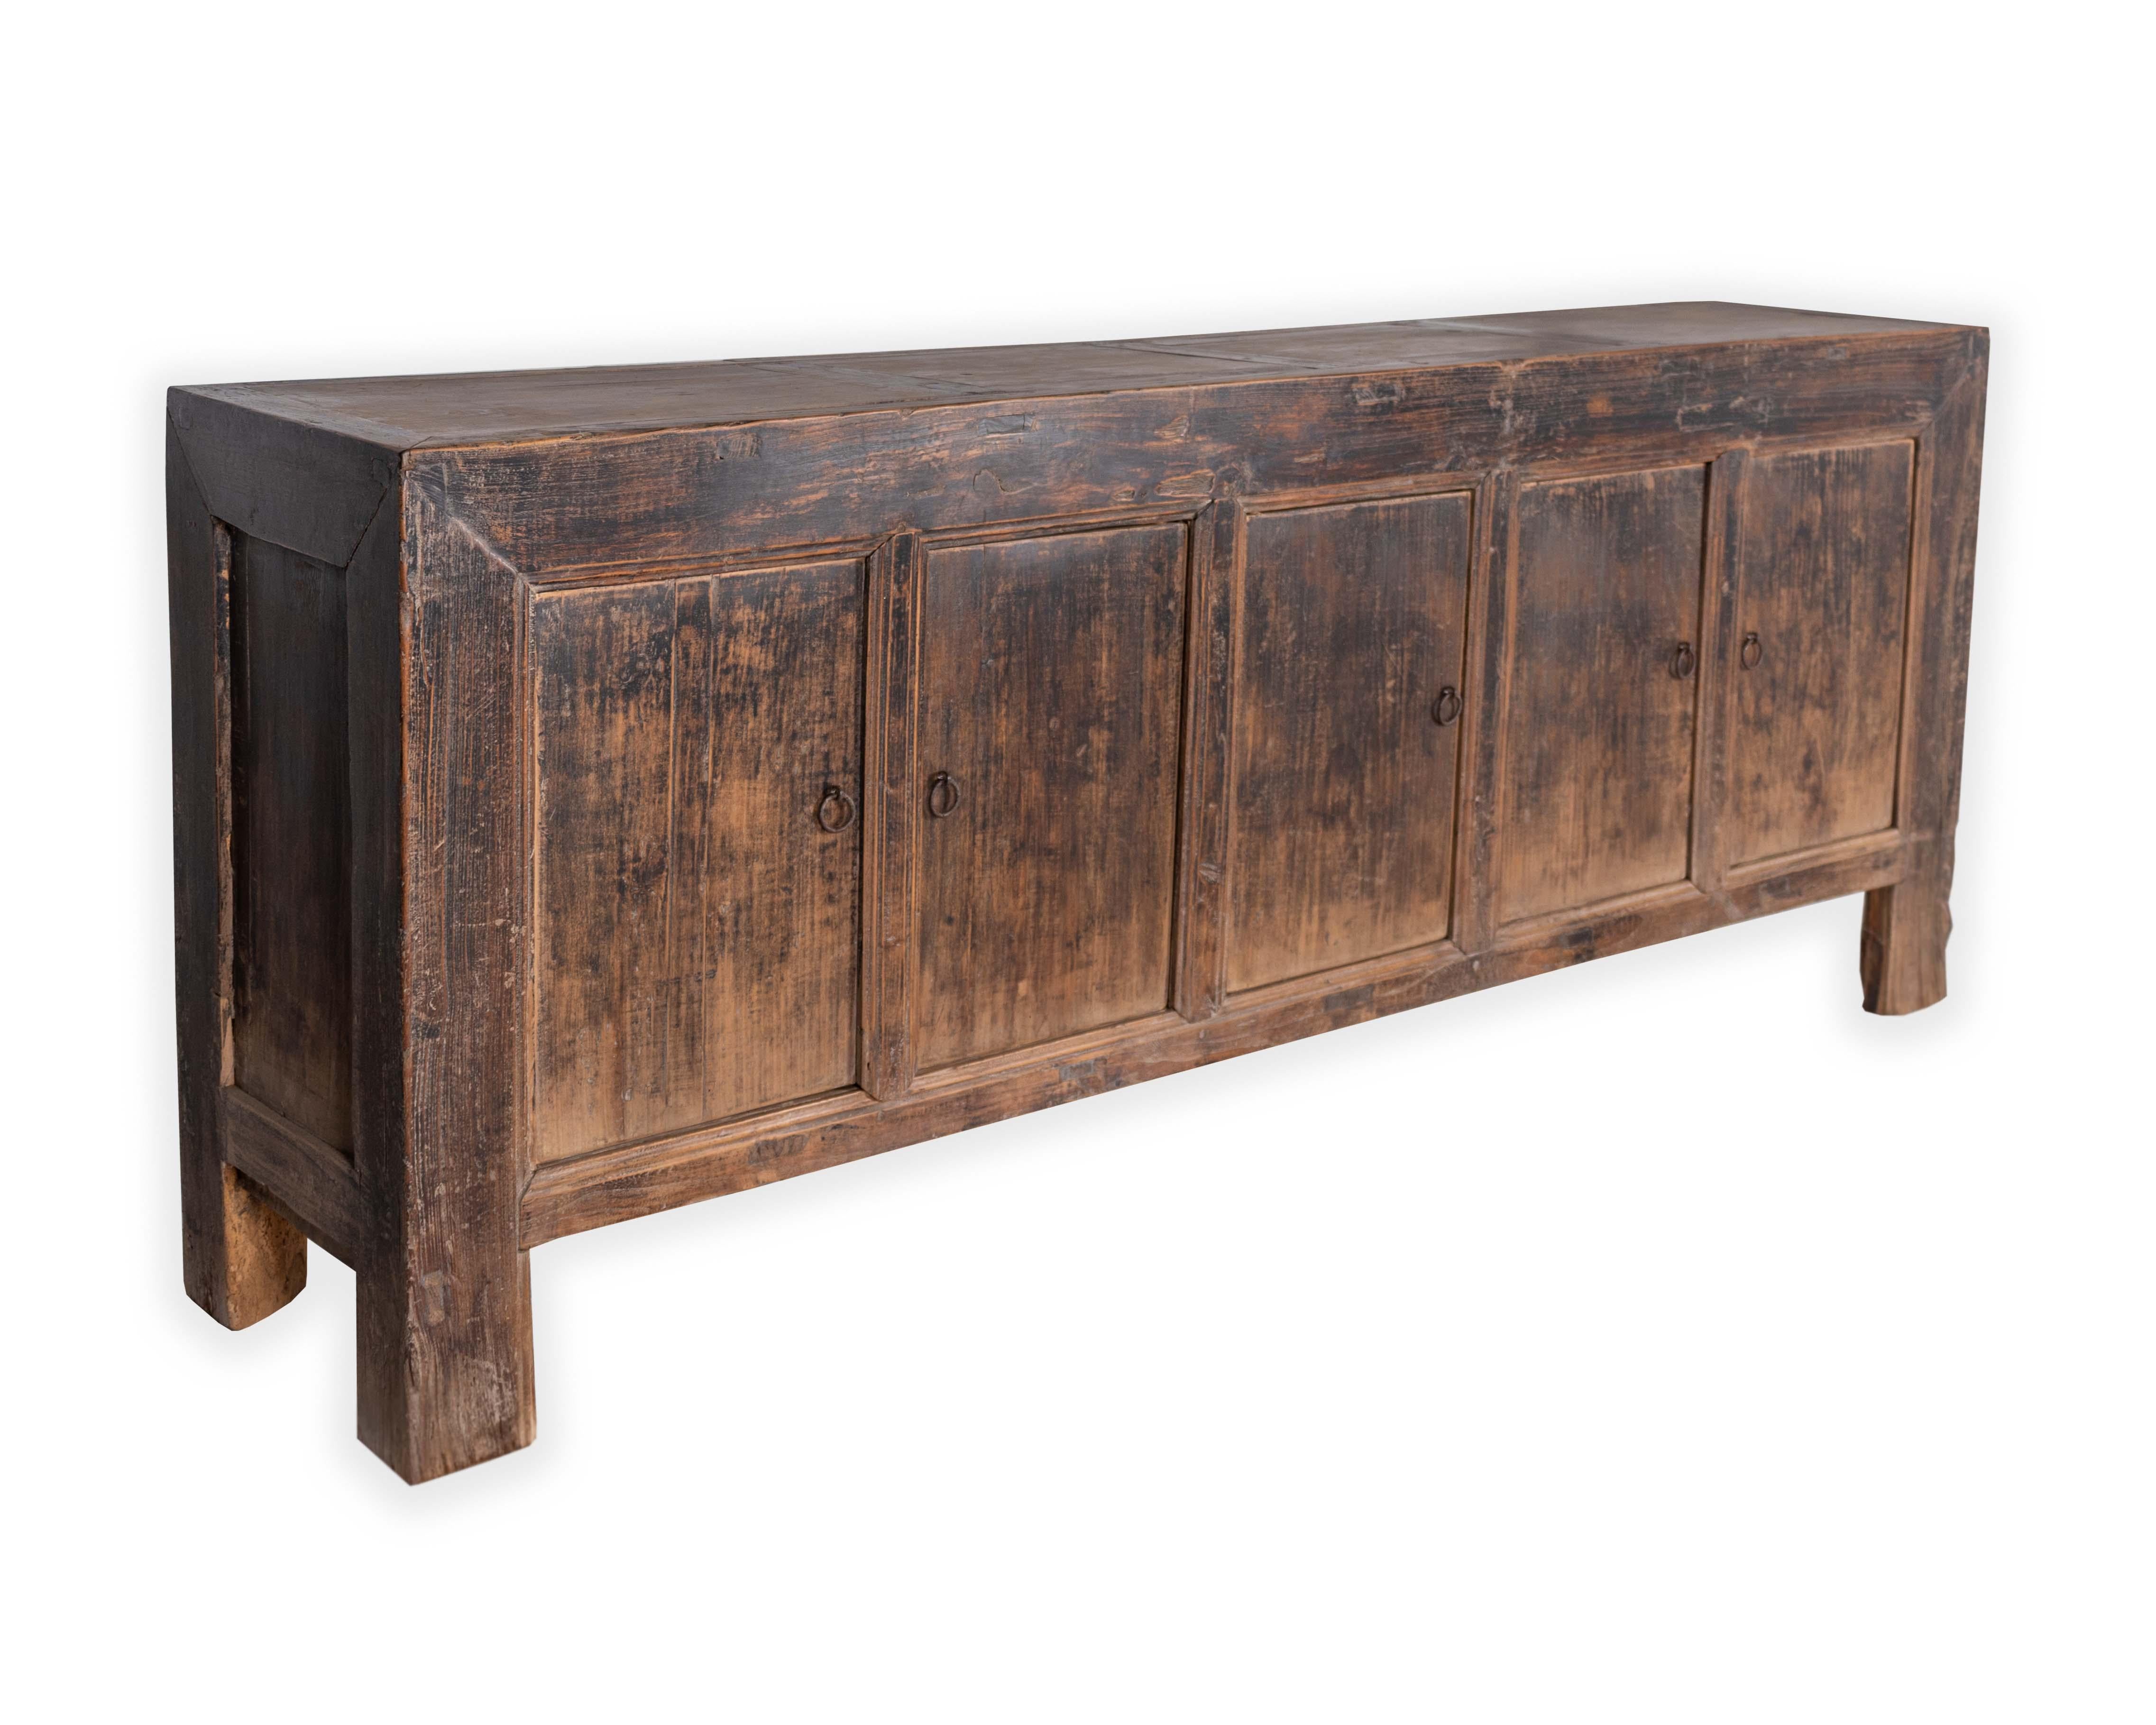 Five door deep brown server console table. Made from distressed wood. Designed in my organic, contemporary, and mid-century modern style.

This piece is a part of Brendan Bass’s one-of-a-kind collection, Le Monde. French for “The World”, the Le